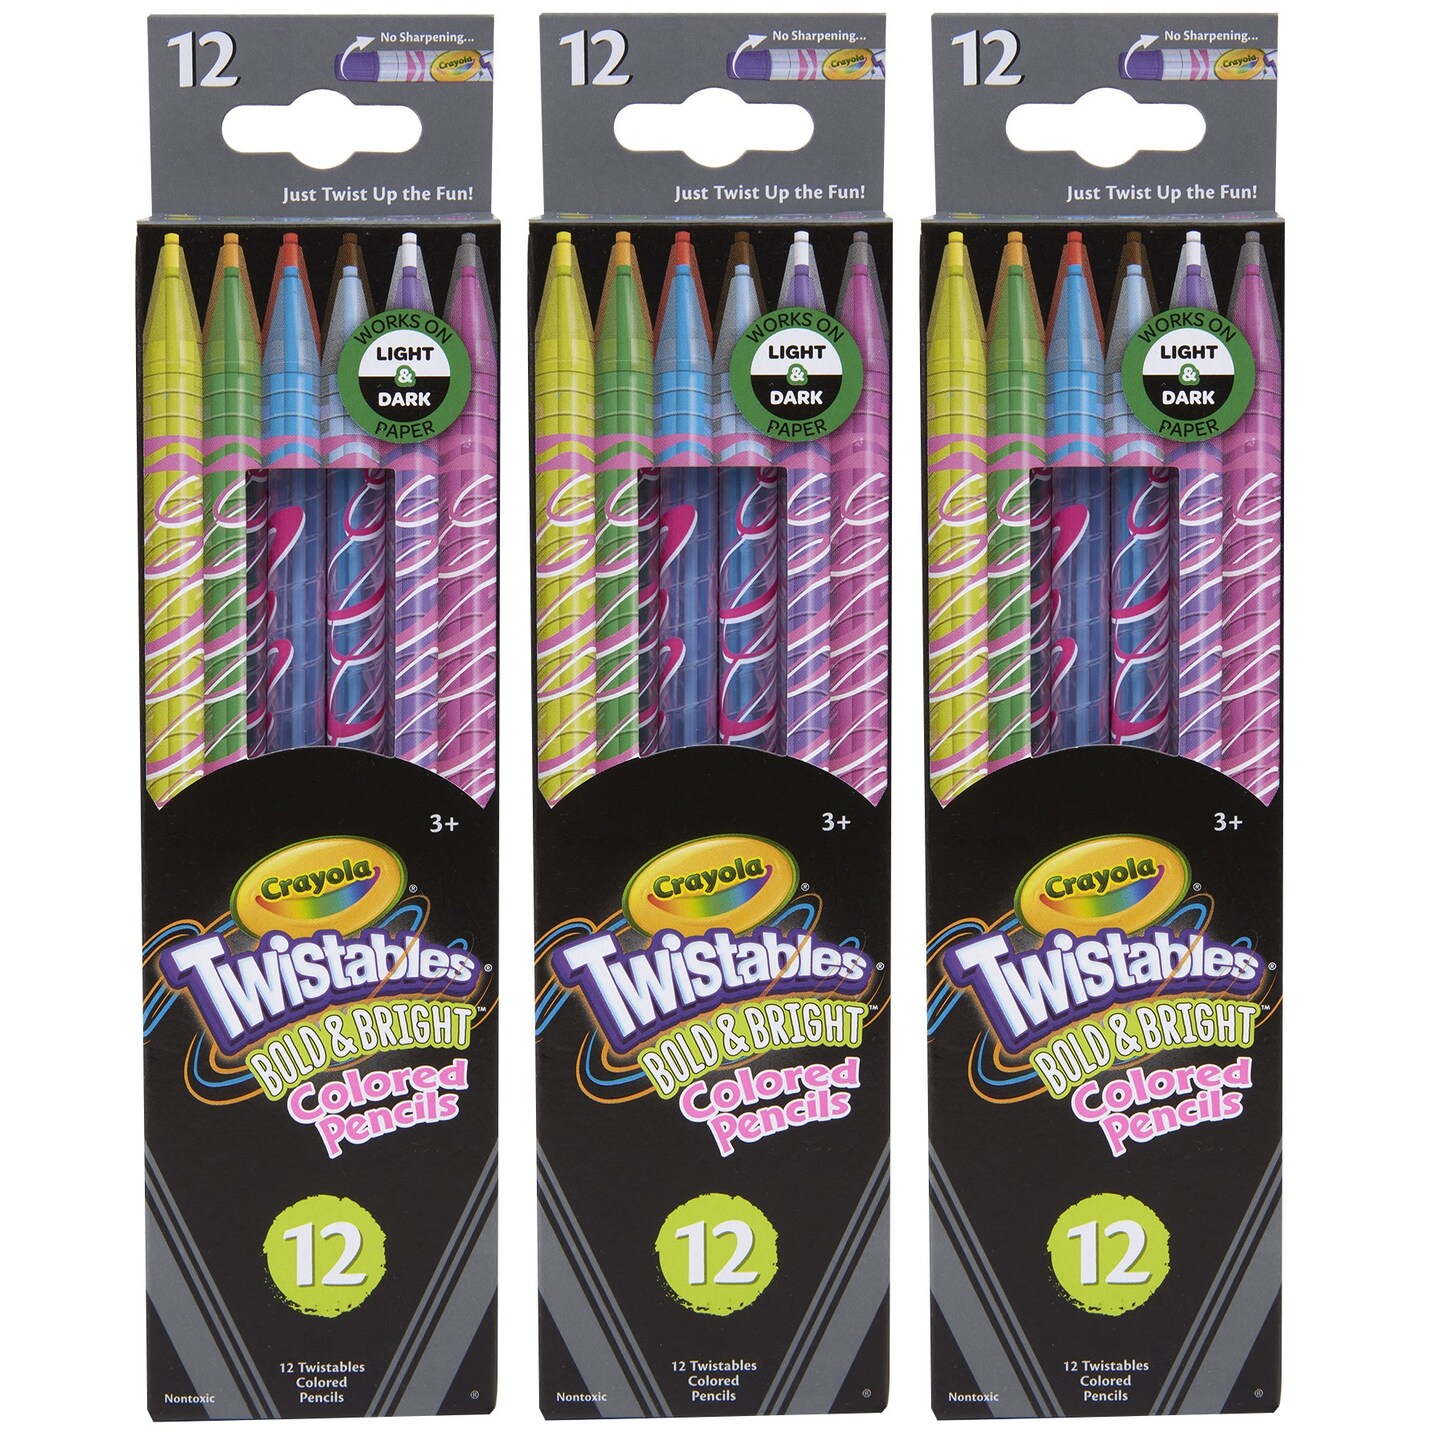 Crayola Colored Pencils Bulk, 12 Colored Pencil Packs with 12 Colors, Gifts